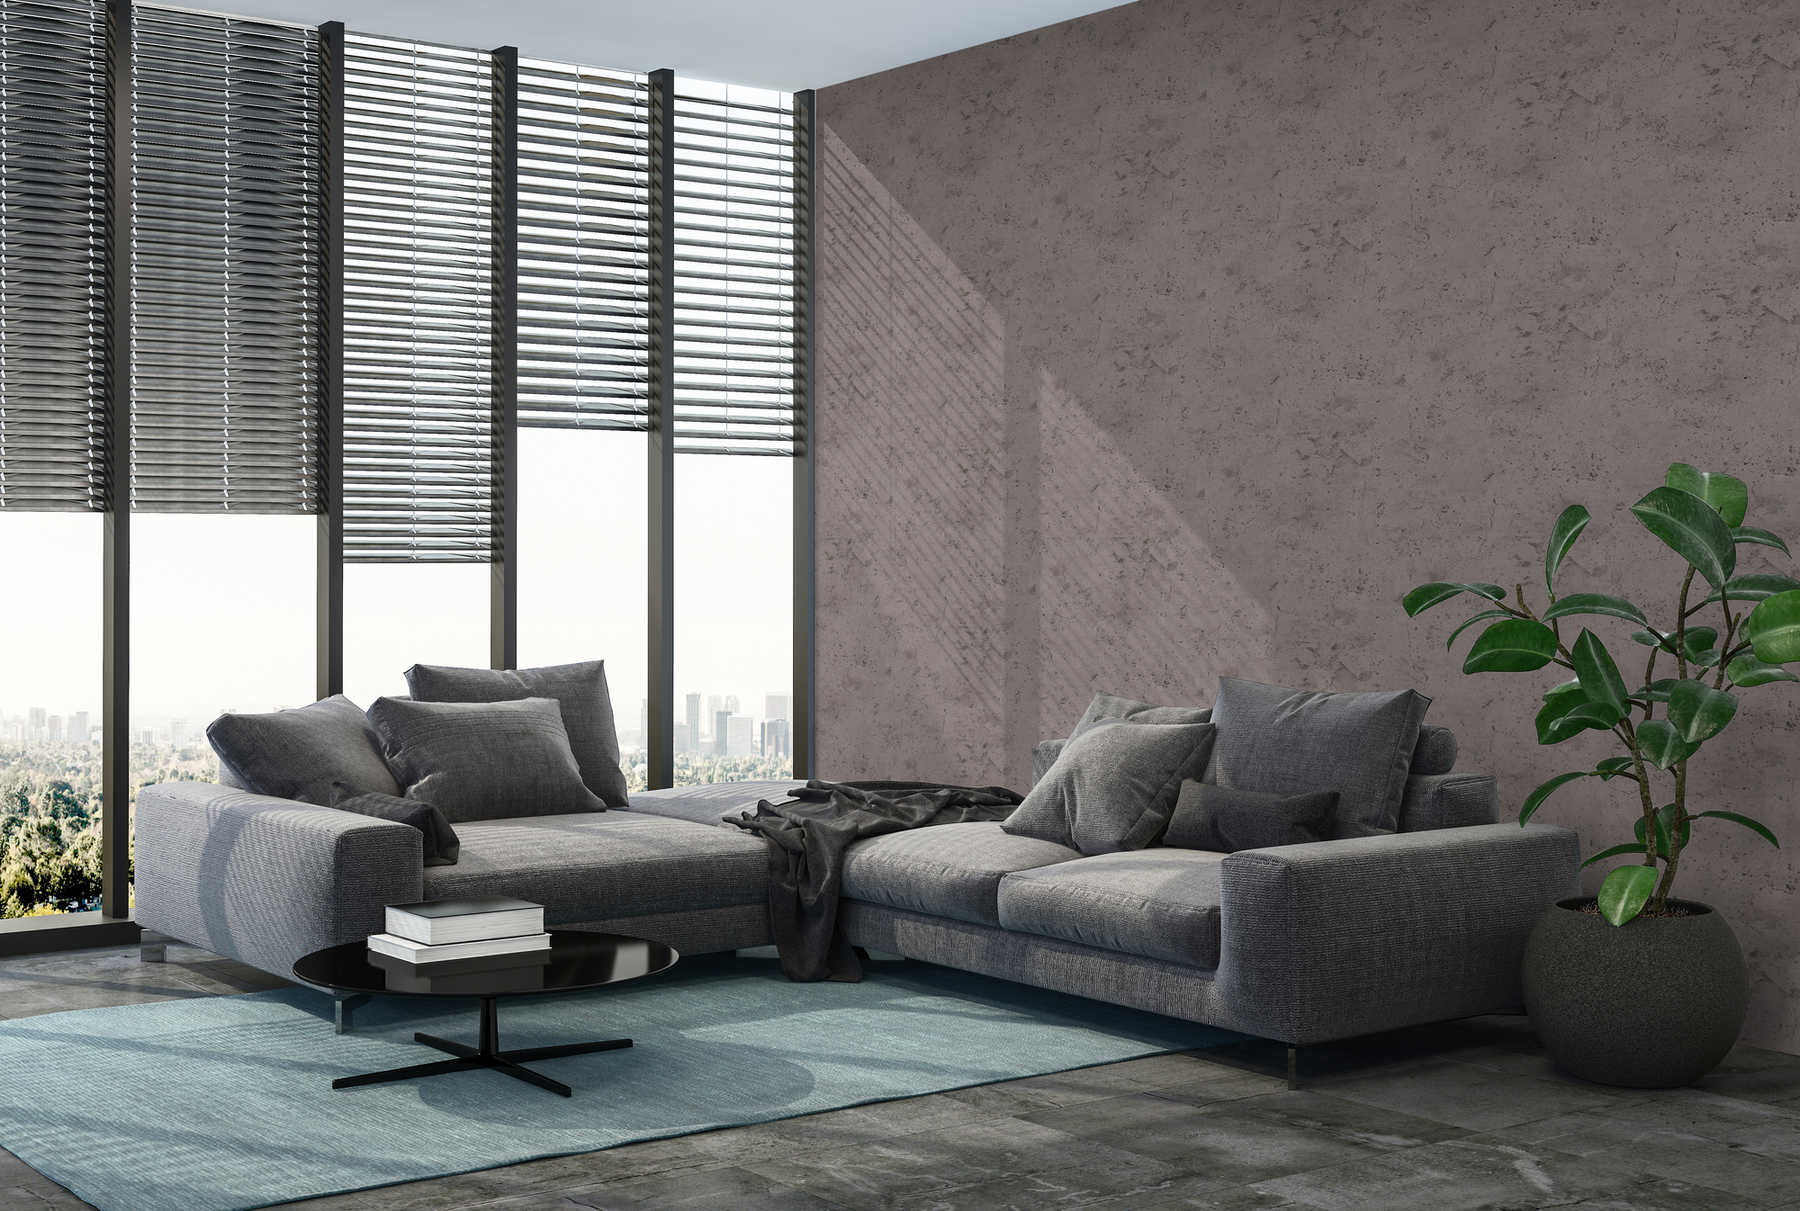             Concrete wallpaper in industrial style - grey-brown, taupe
        